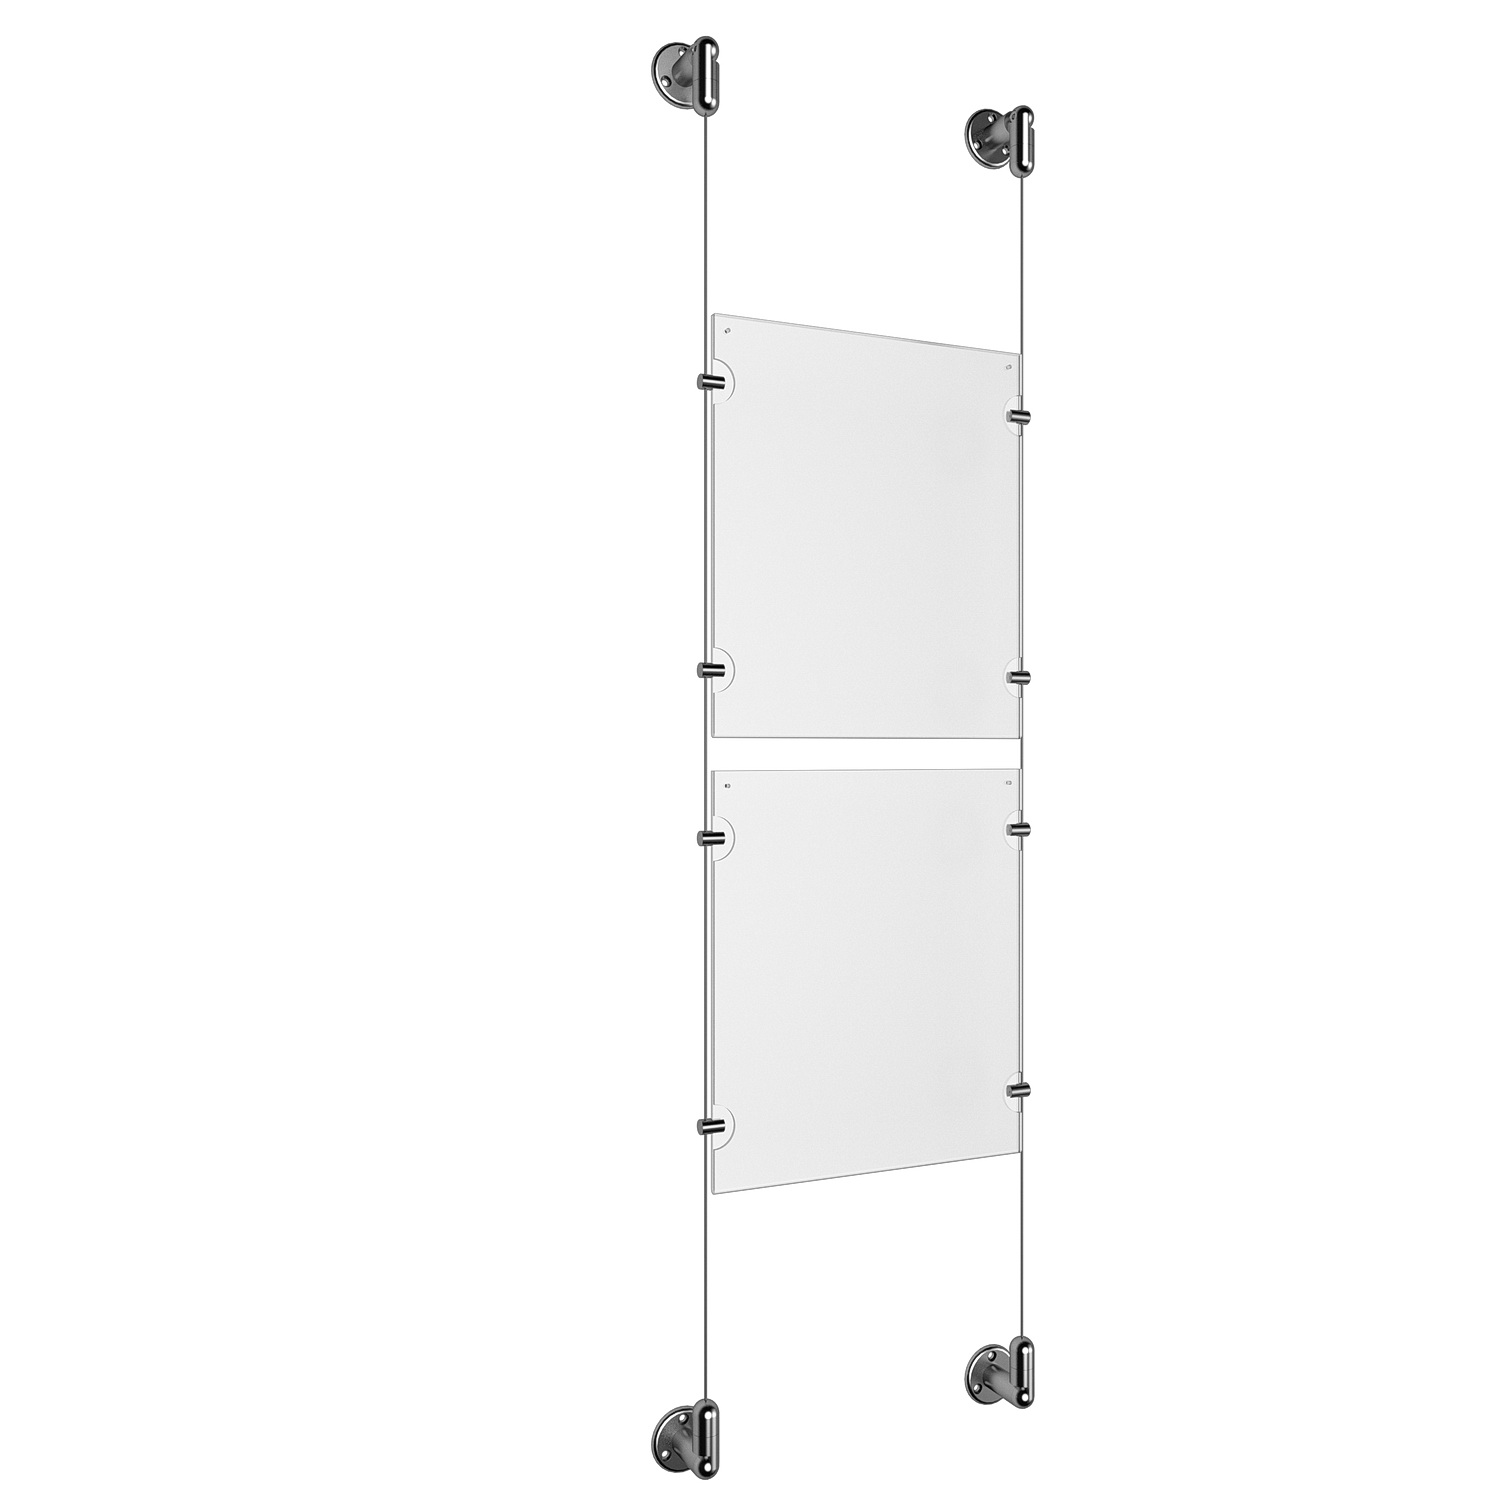 (2) 8-1/2'' Width x 11'' Height Clear Acrylic Frame & (2) Aluminum Clear Anodized Adjustable Angle Cable Systems with (8) Single-Sided Panel Grippers